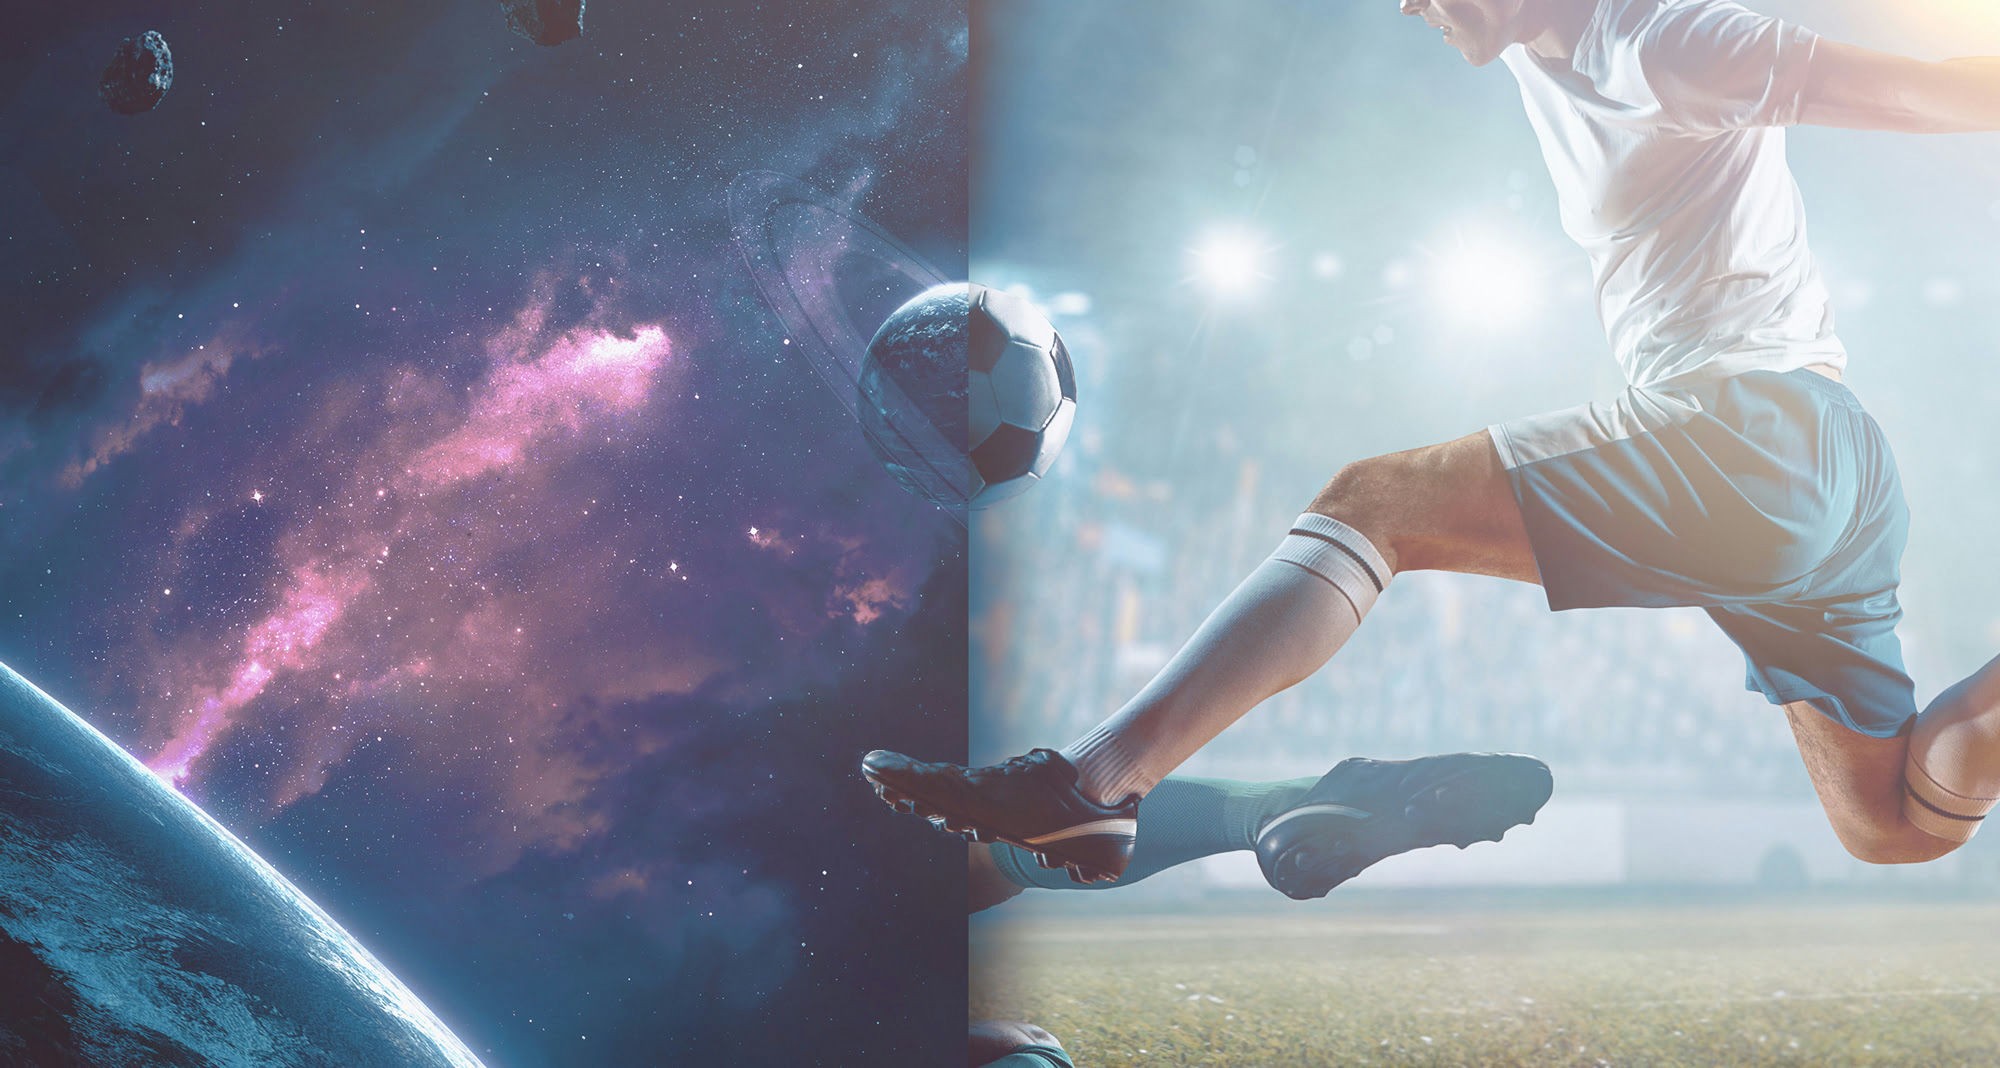 An image of a soccer ball and an image of a planet in space merged together to represent a match cut